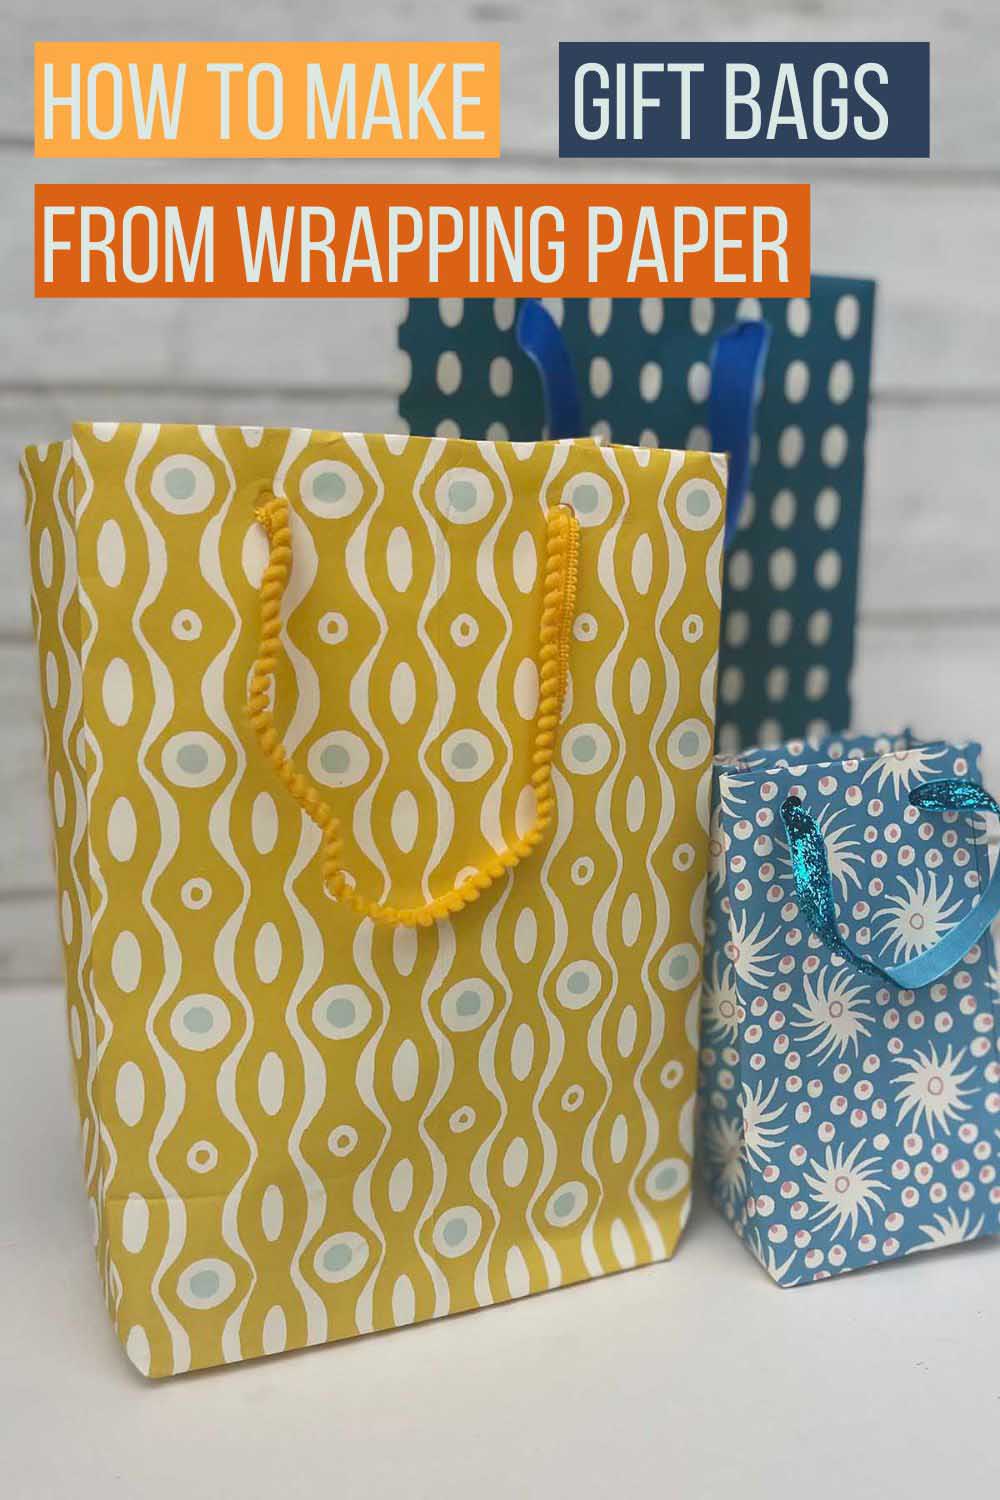 How to make bags out of wrapping paper